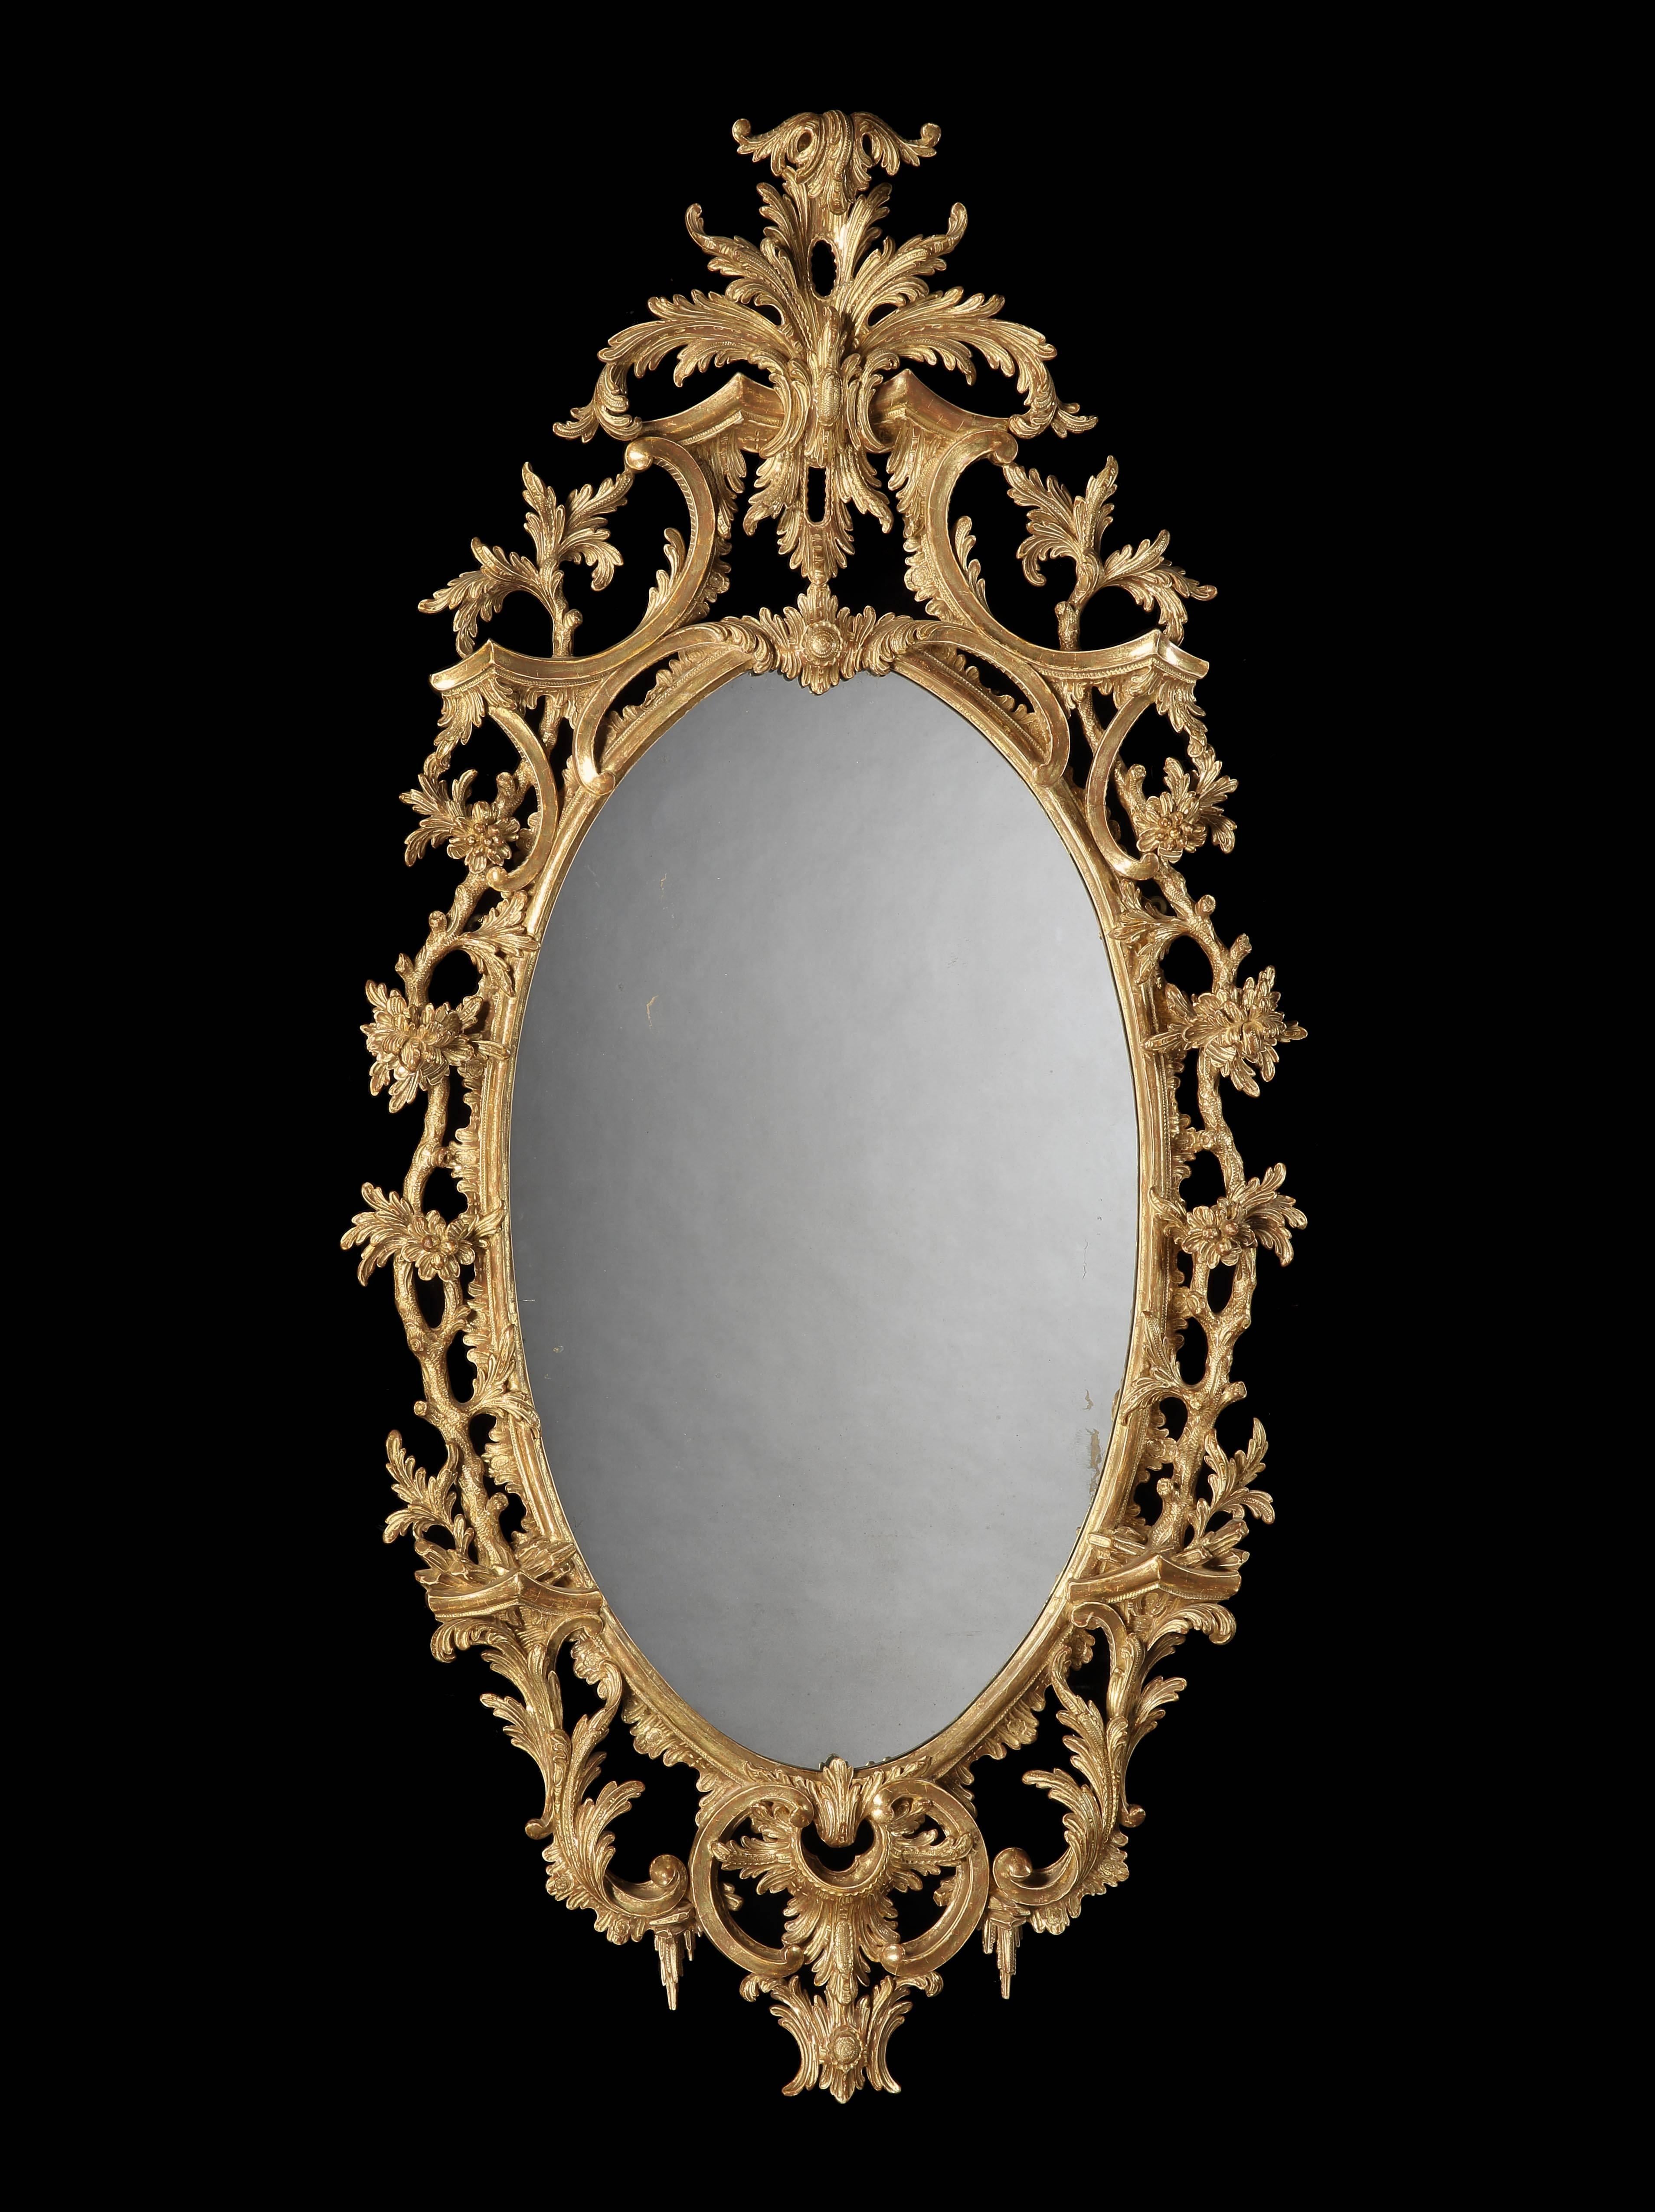 The elliptical mirror plates enclosed by gesso and gold giltwood frames, exuberantly carved with scrolling acanthi, foliates and scrollwork in the Rococo manner, the surmounts having cabochons issuing acanthus spray crests,
circa 1880

Graham